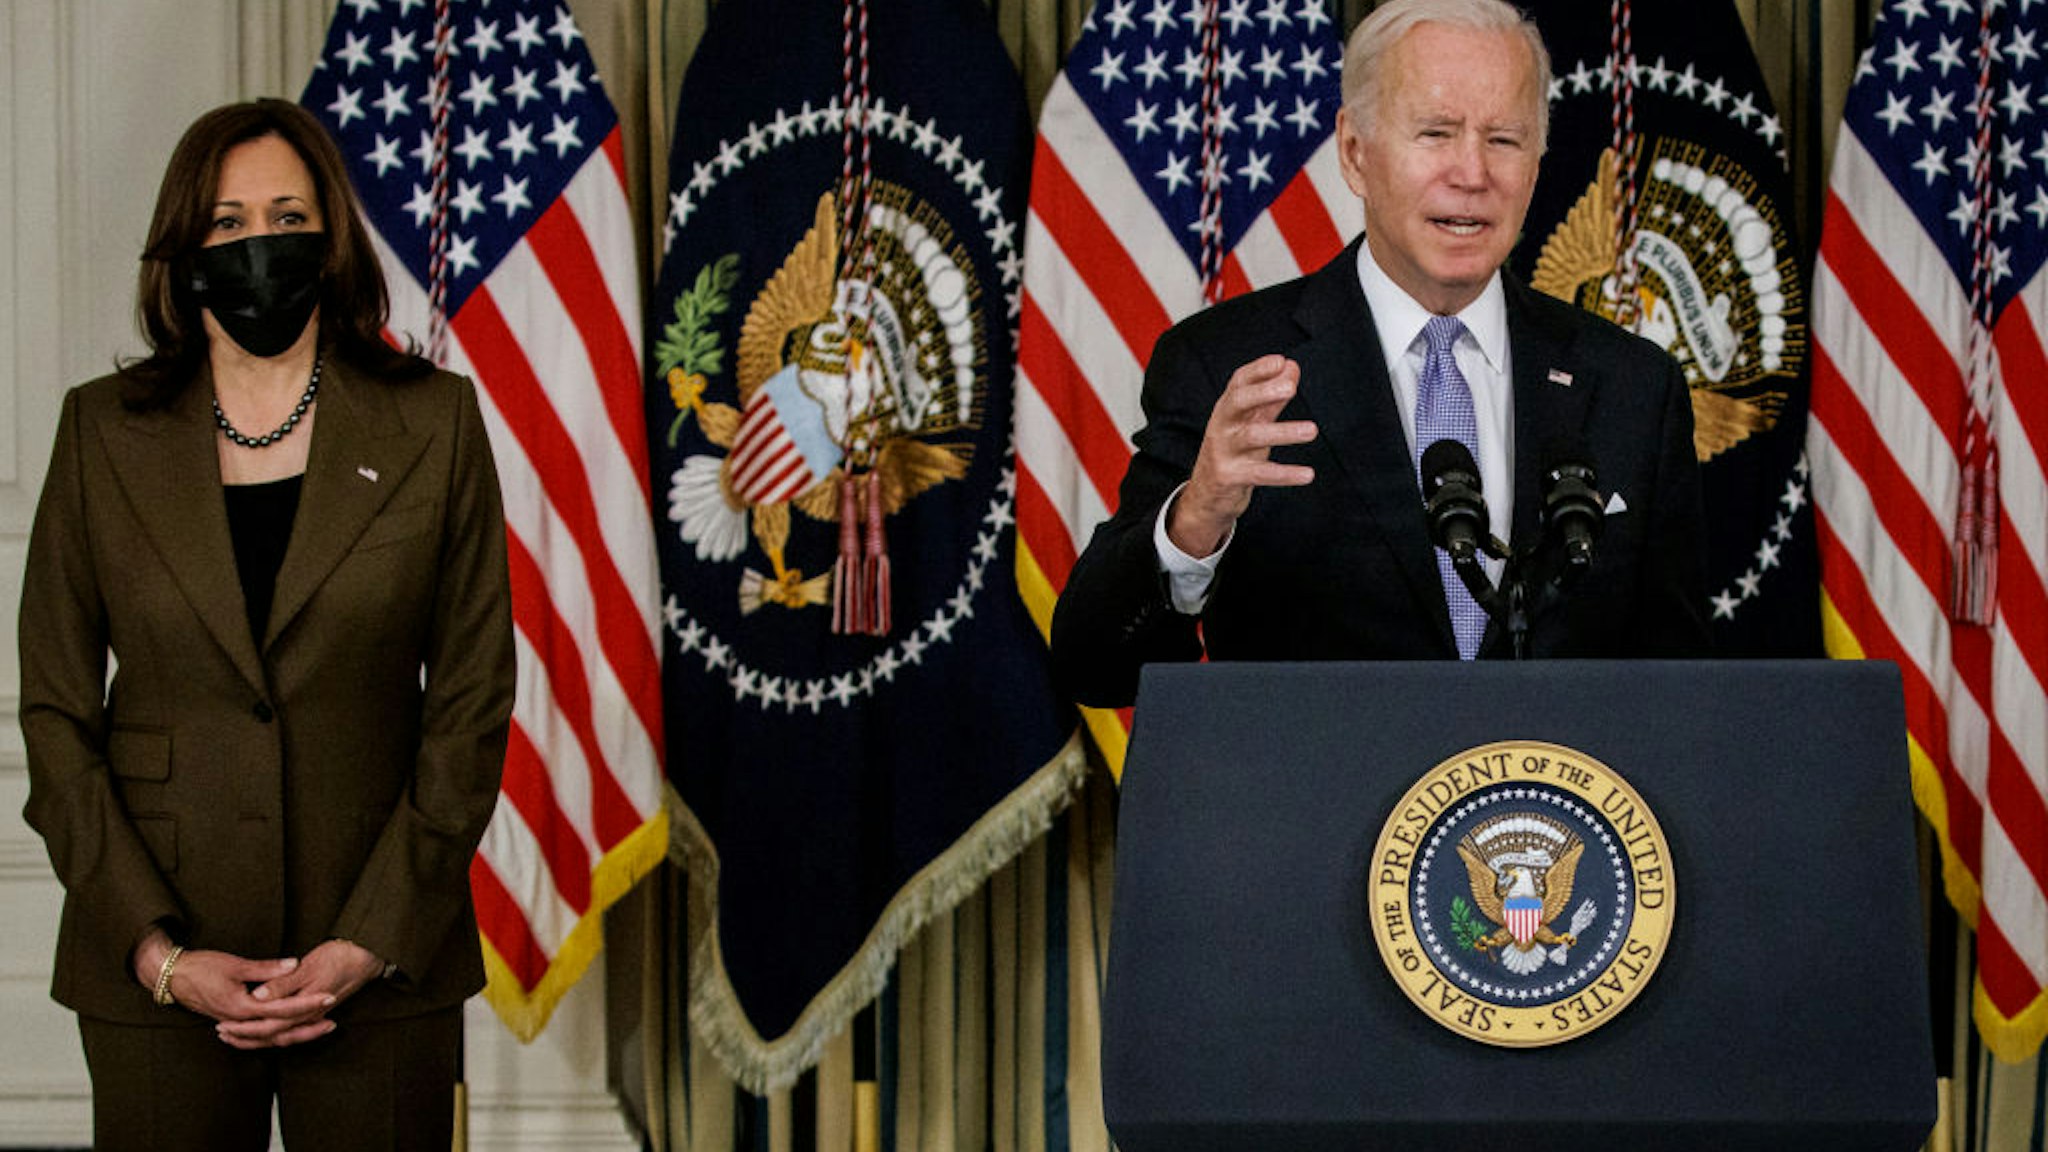 U.S. President Joe Biden speaks alongside Vice President Kamala Harris during a press conference in the State Dining Room at the White House on November 6, 2021 in Washington, DC.